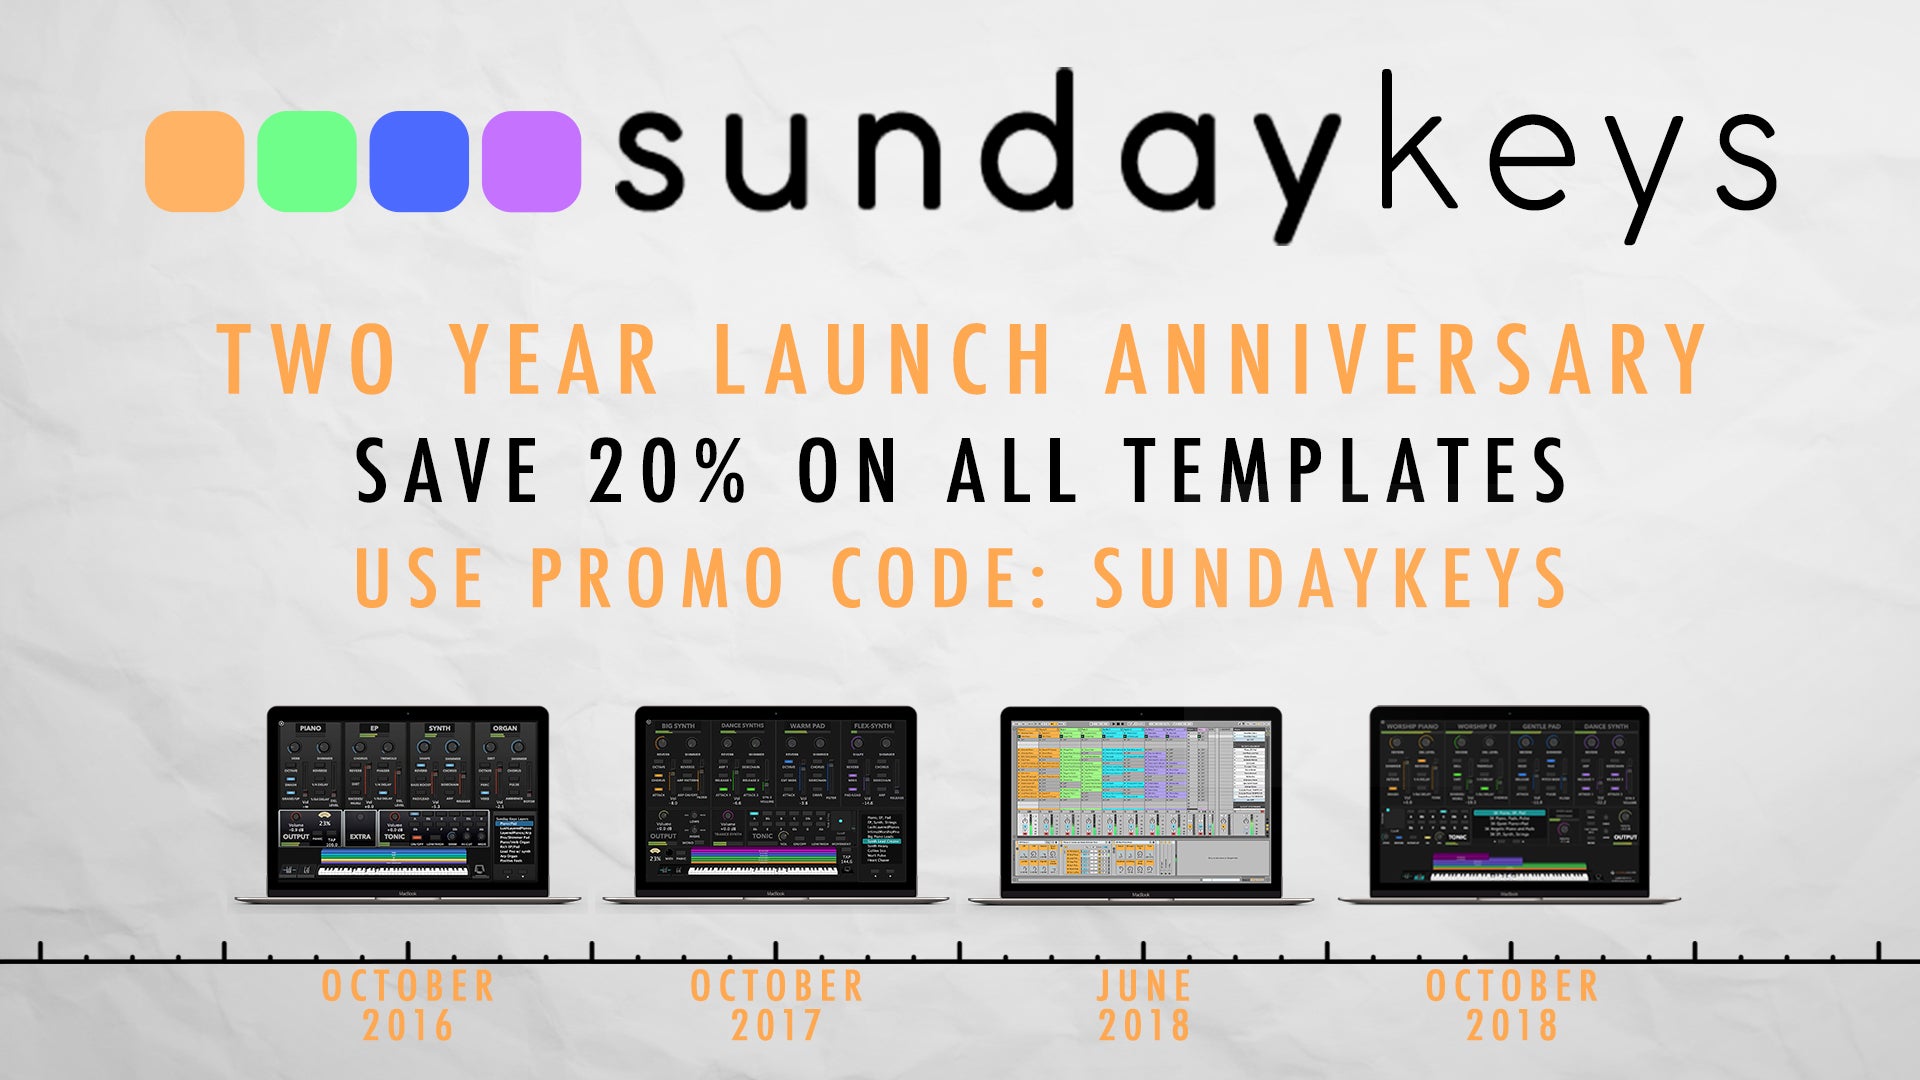 Sunday Keys Turns Two Years Old!